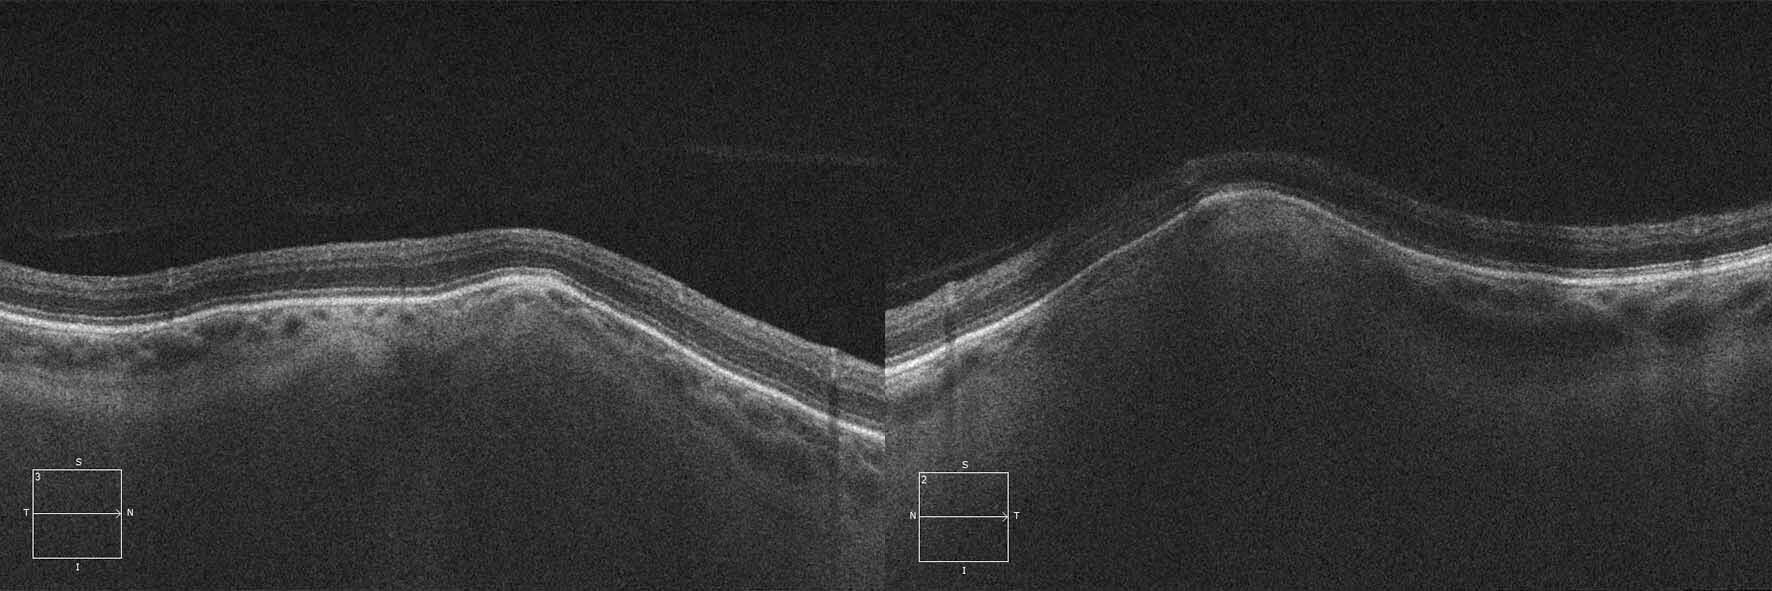 Optical coherence tomography of the lesions shows an undulating elevation of the sclera with thinning of the overlying choroid. The retina is normal.